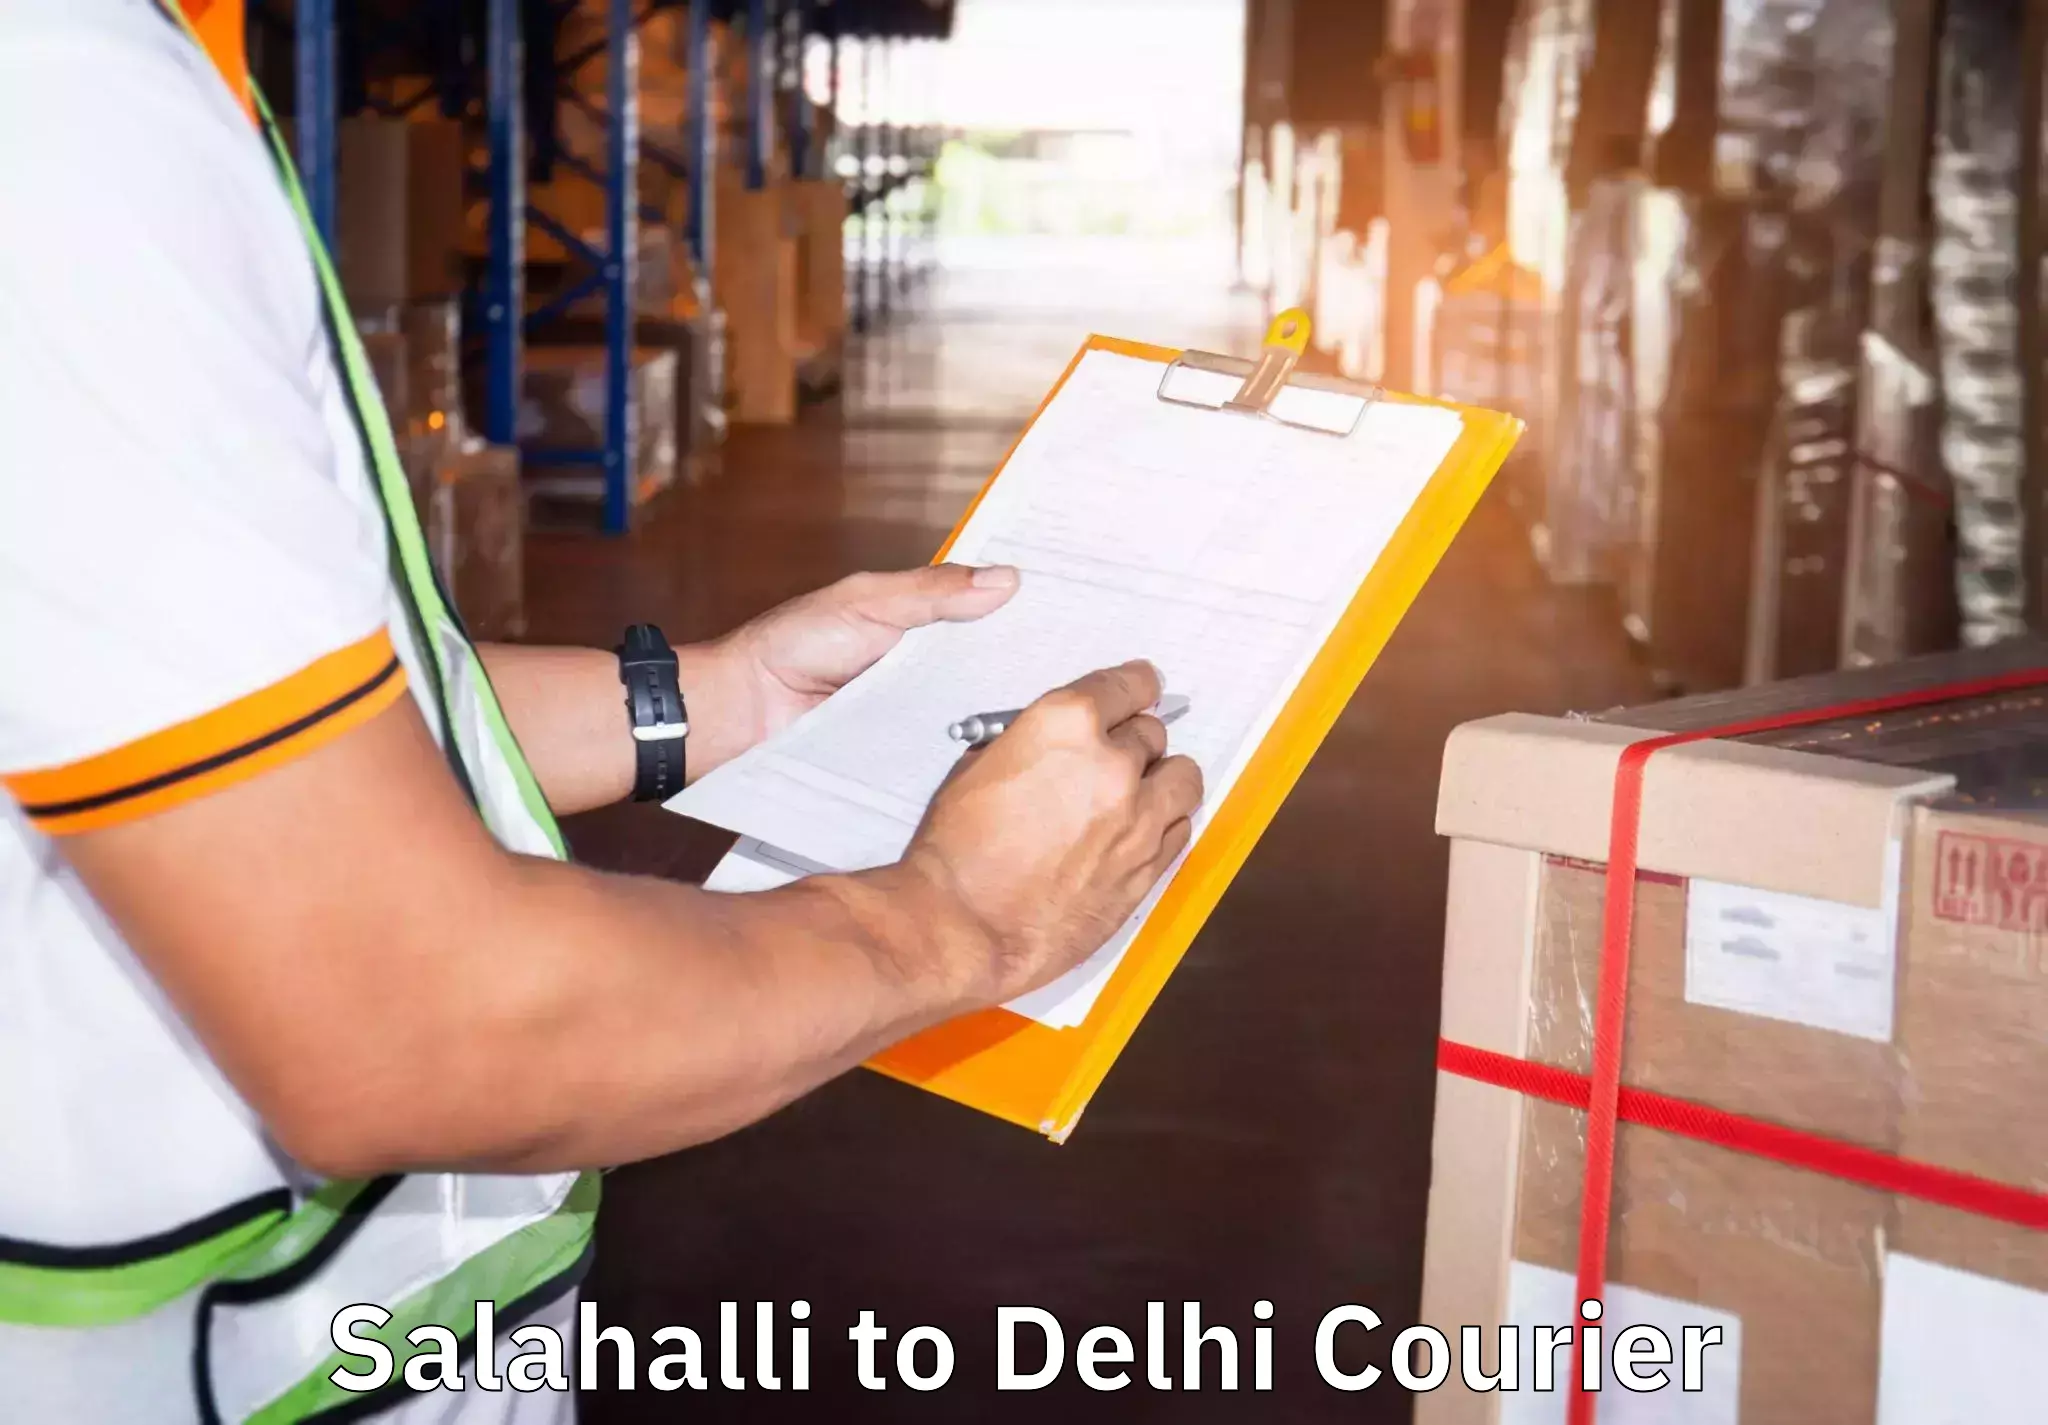 Budget-friendly moving services Salahalli to Lodhi Road